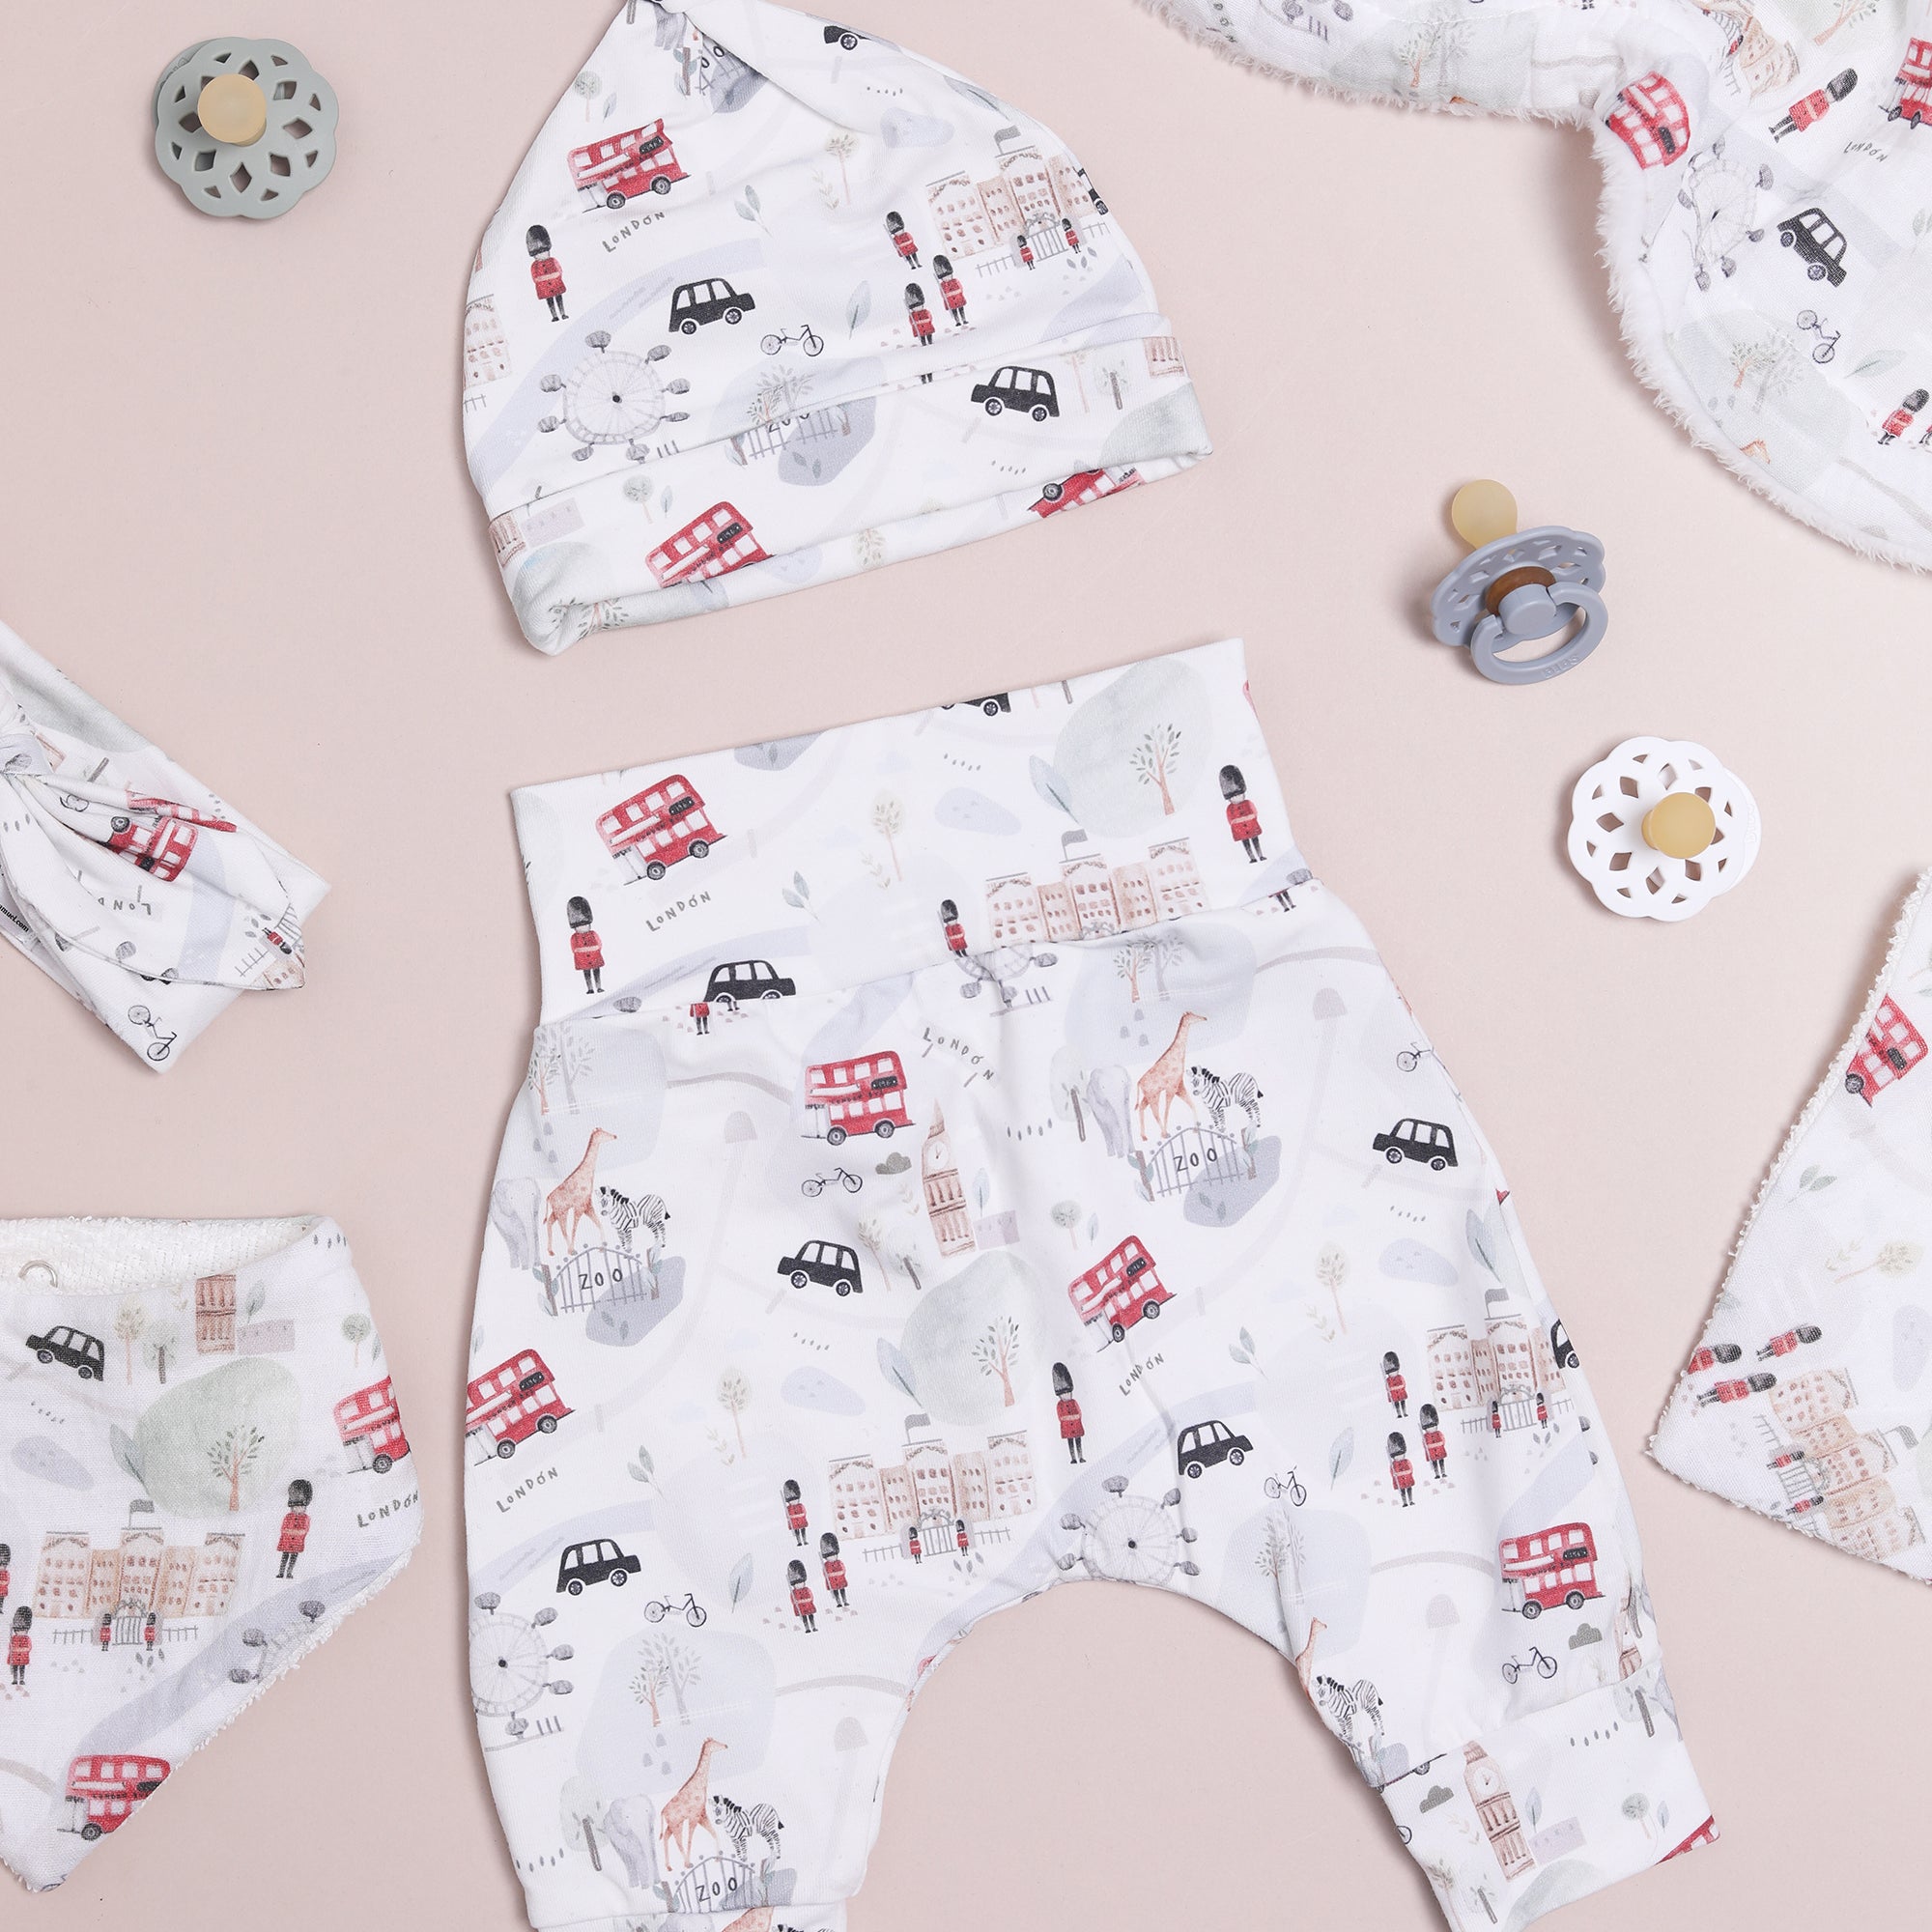 London baby leggings and accessories (Organic) Sue and Samuel